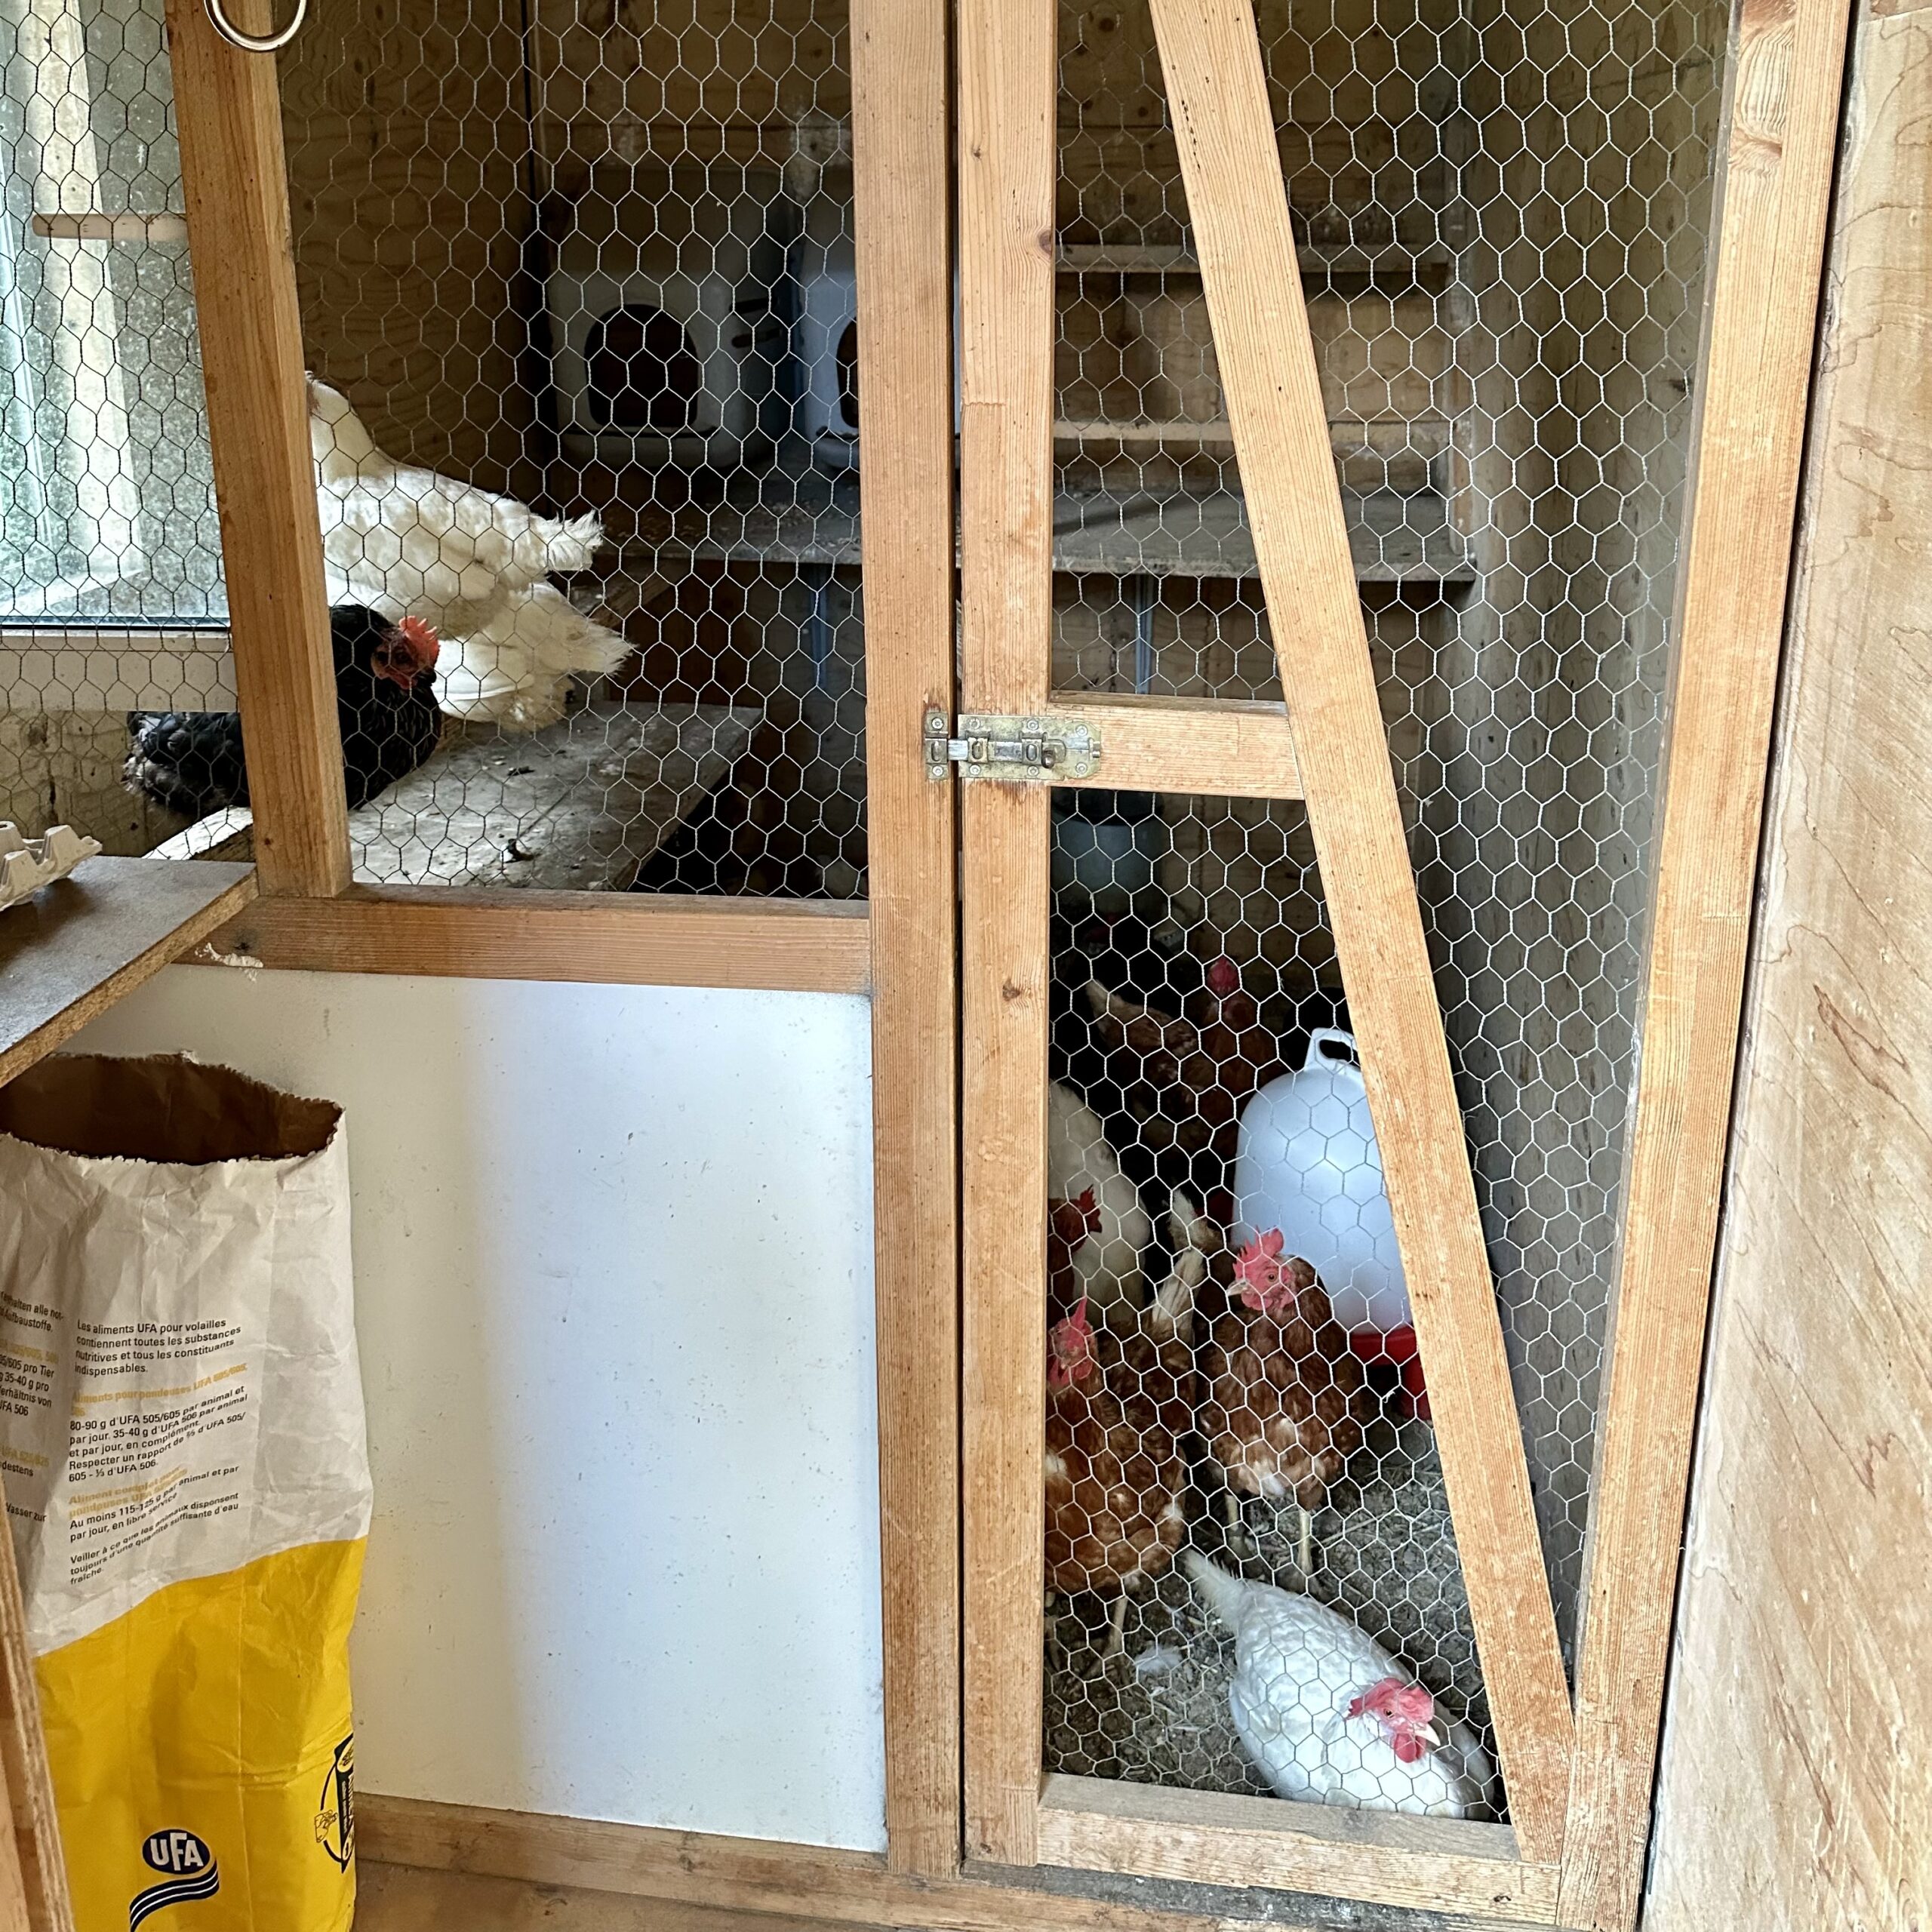 A chicken coop with several chickens